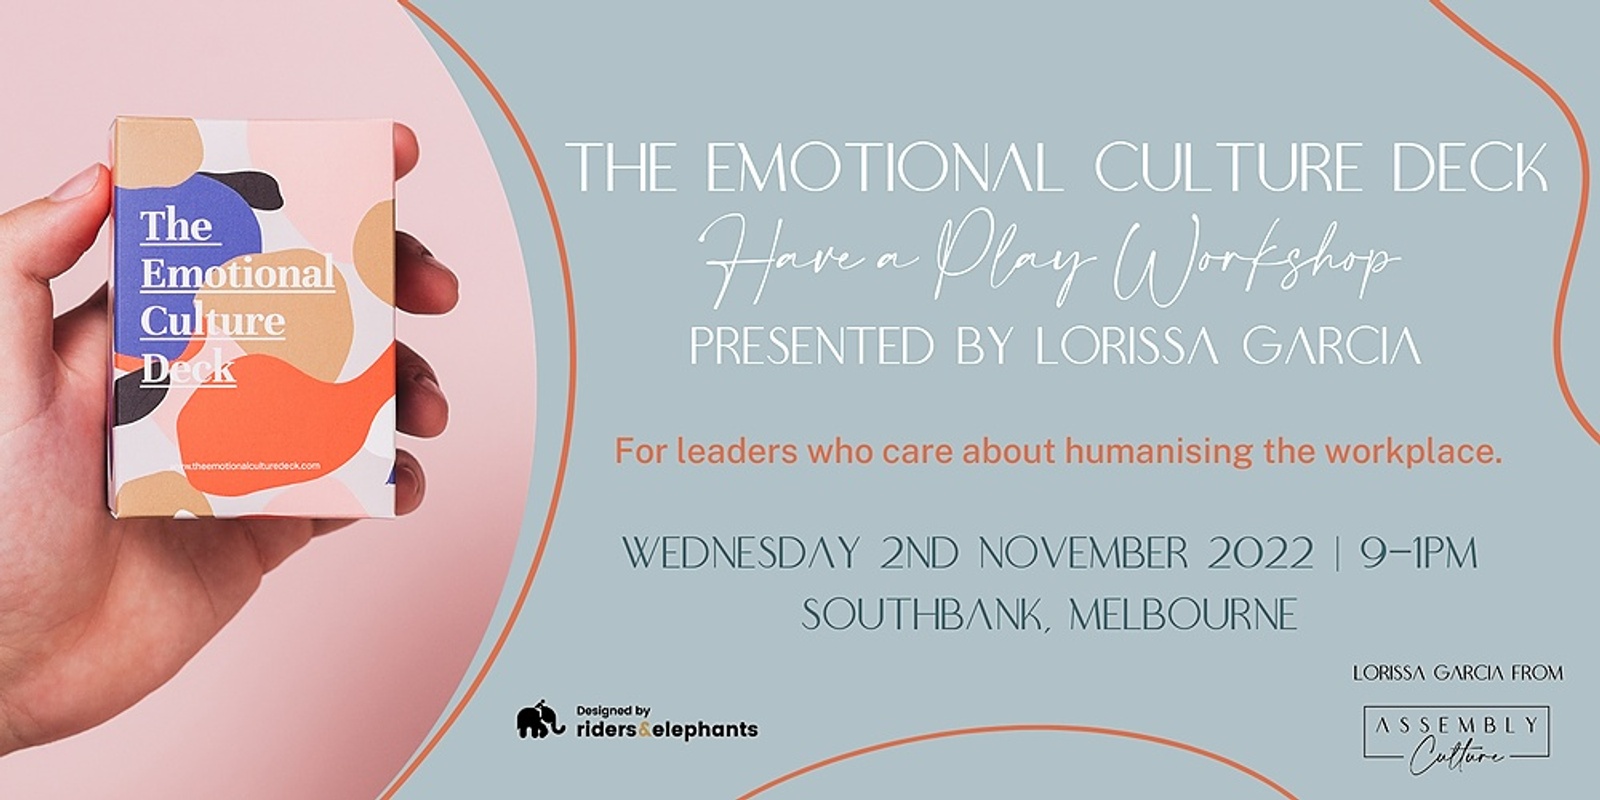 Banner image for The Emotional Culture Deck 'Have a Play' Workshop presented by Lorissa Garcia